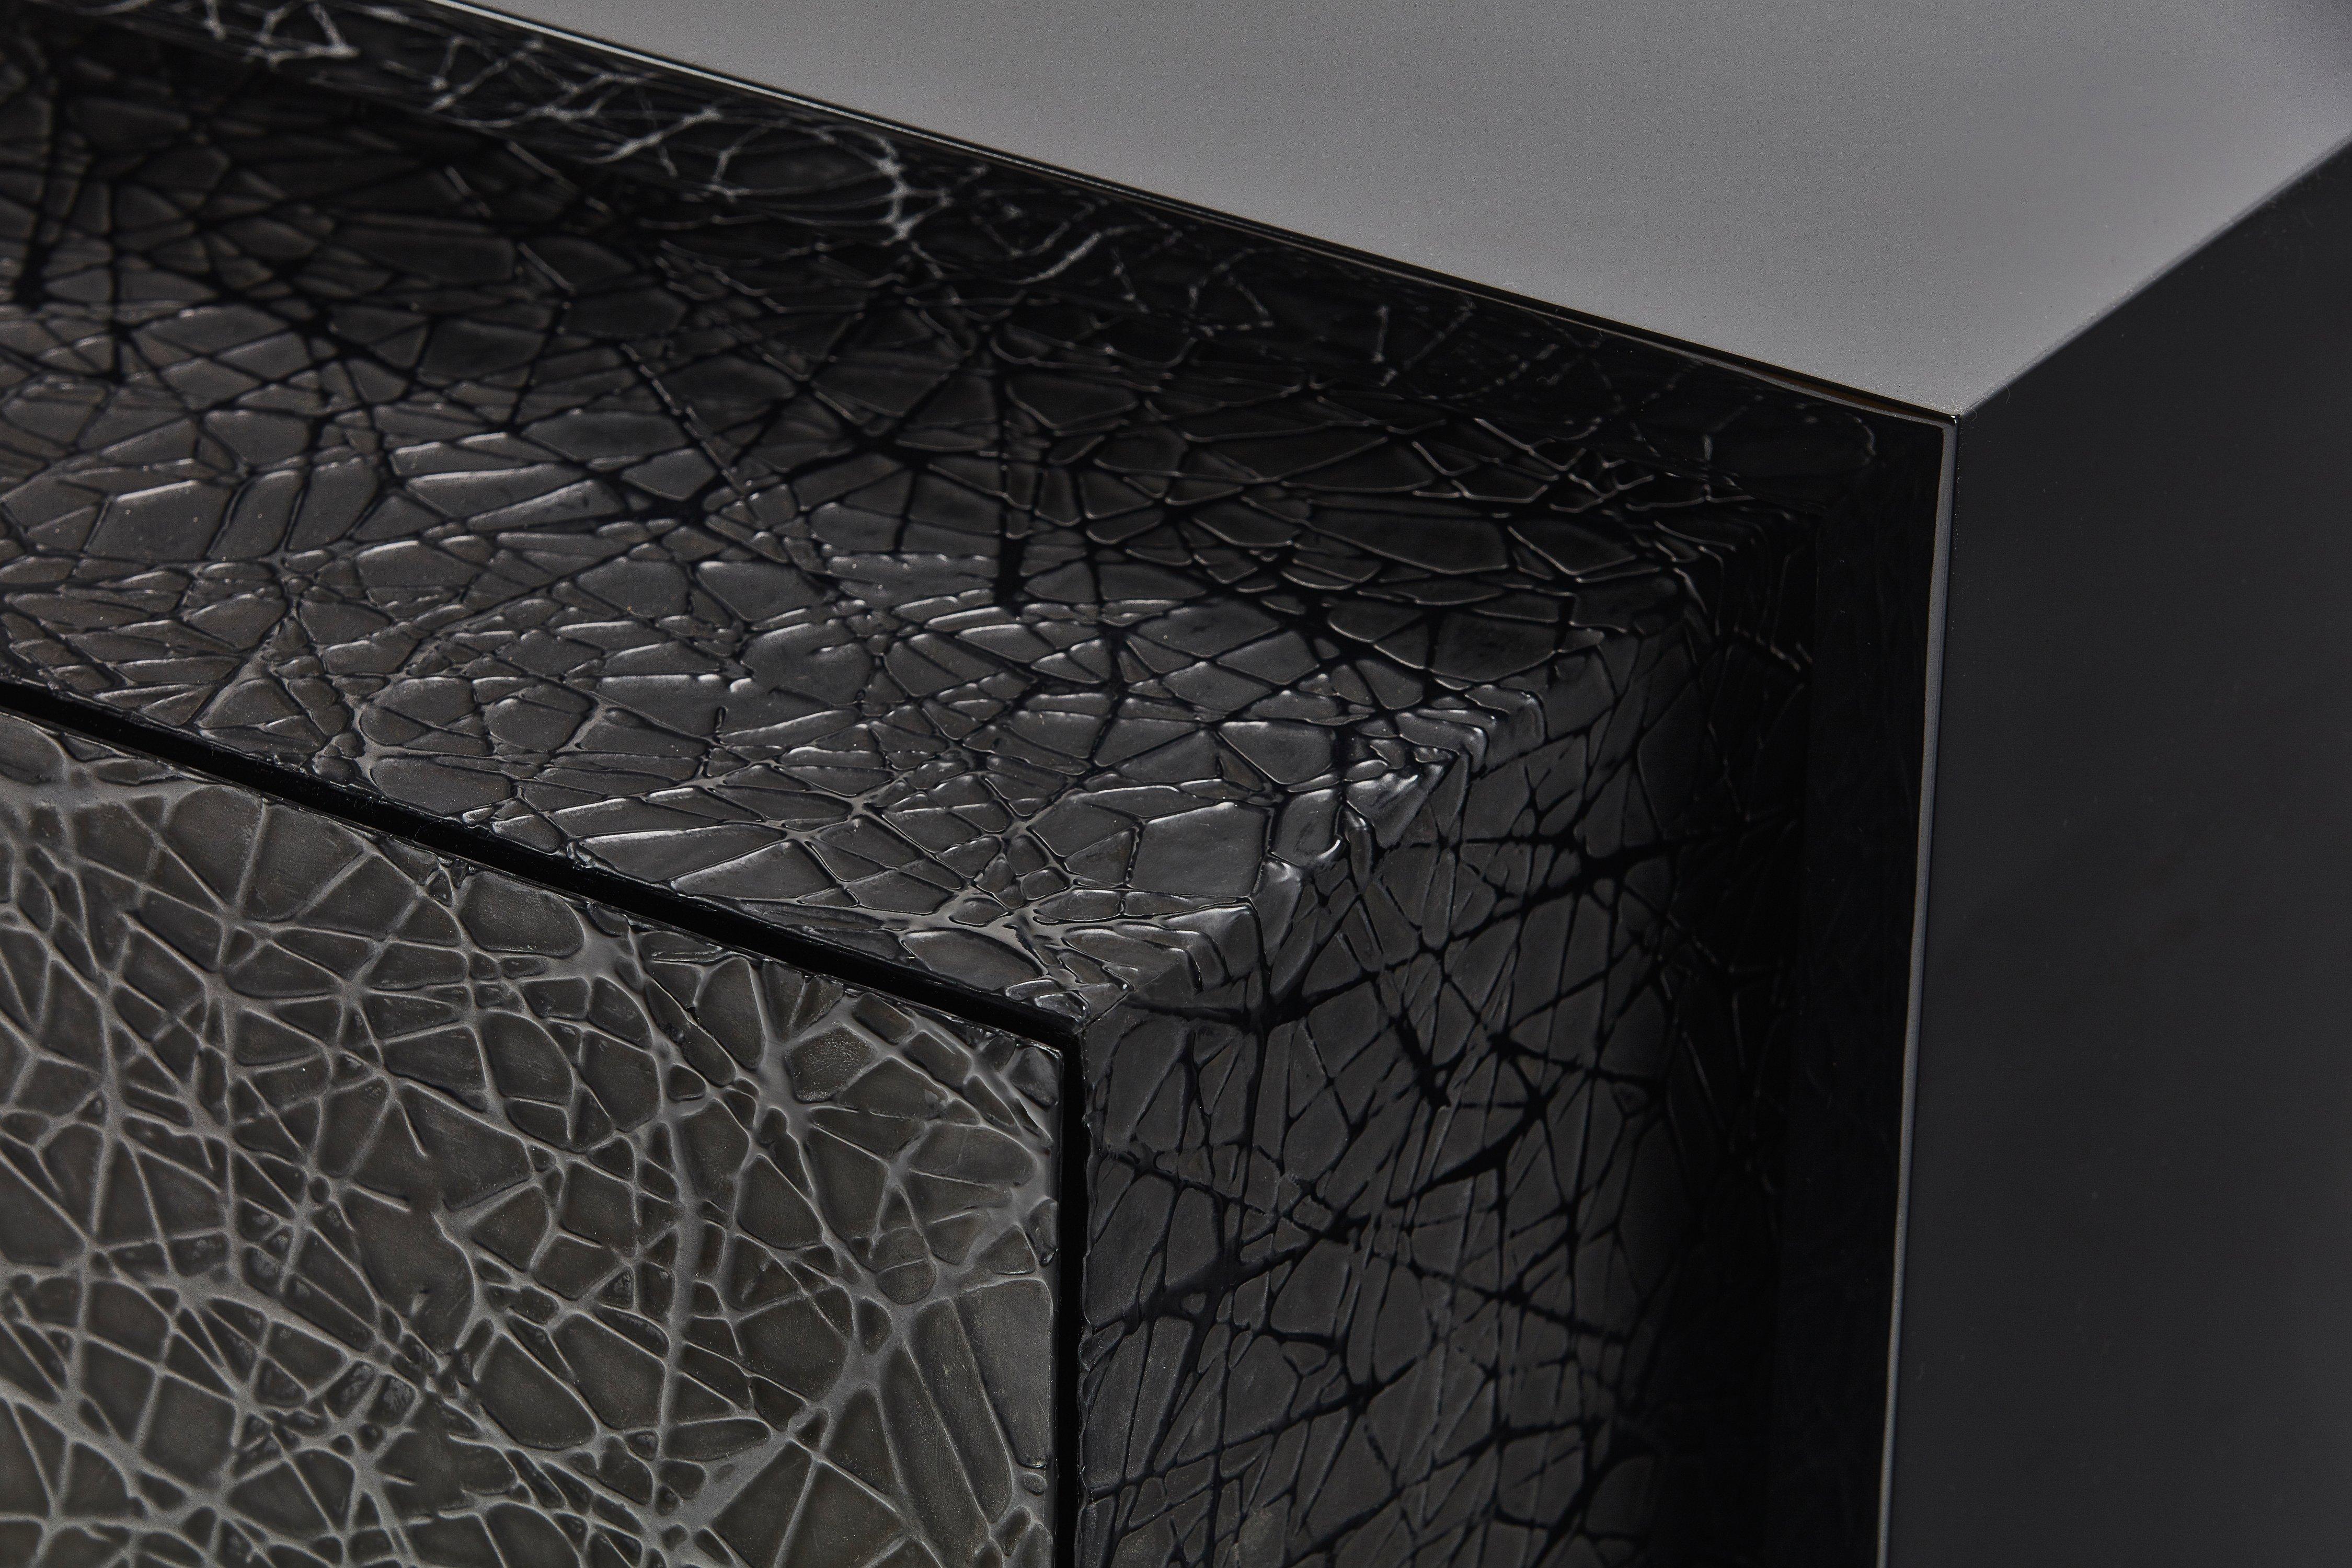 Polish Duo Side Tables with Piano Black Lacquer and Resin Art Texture, Customizable For Sale